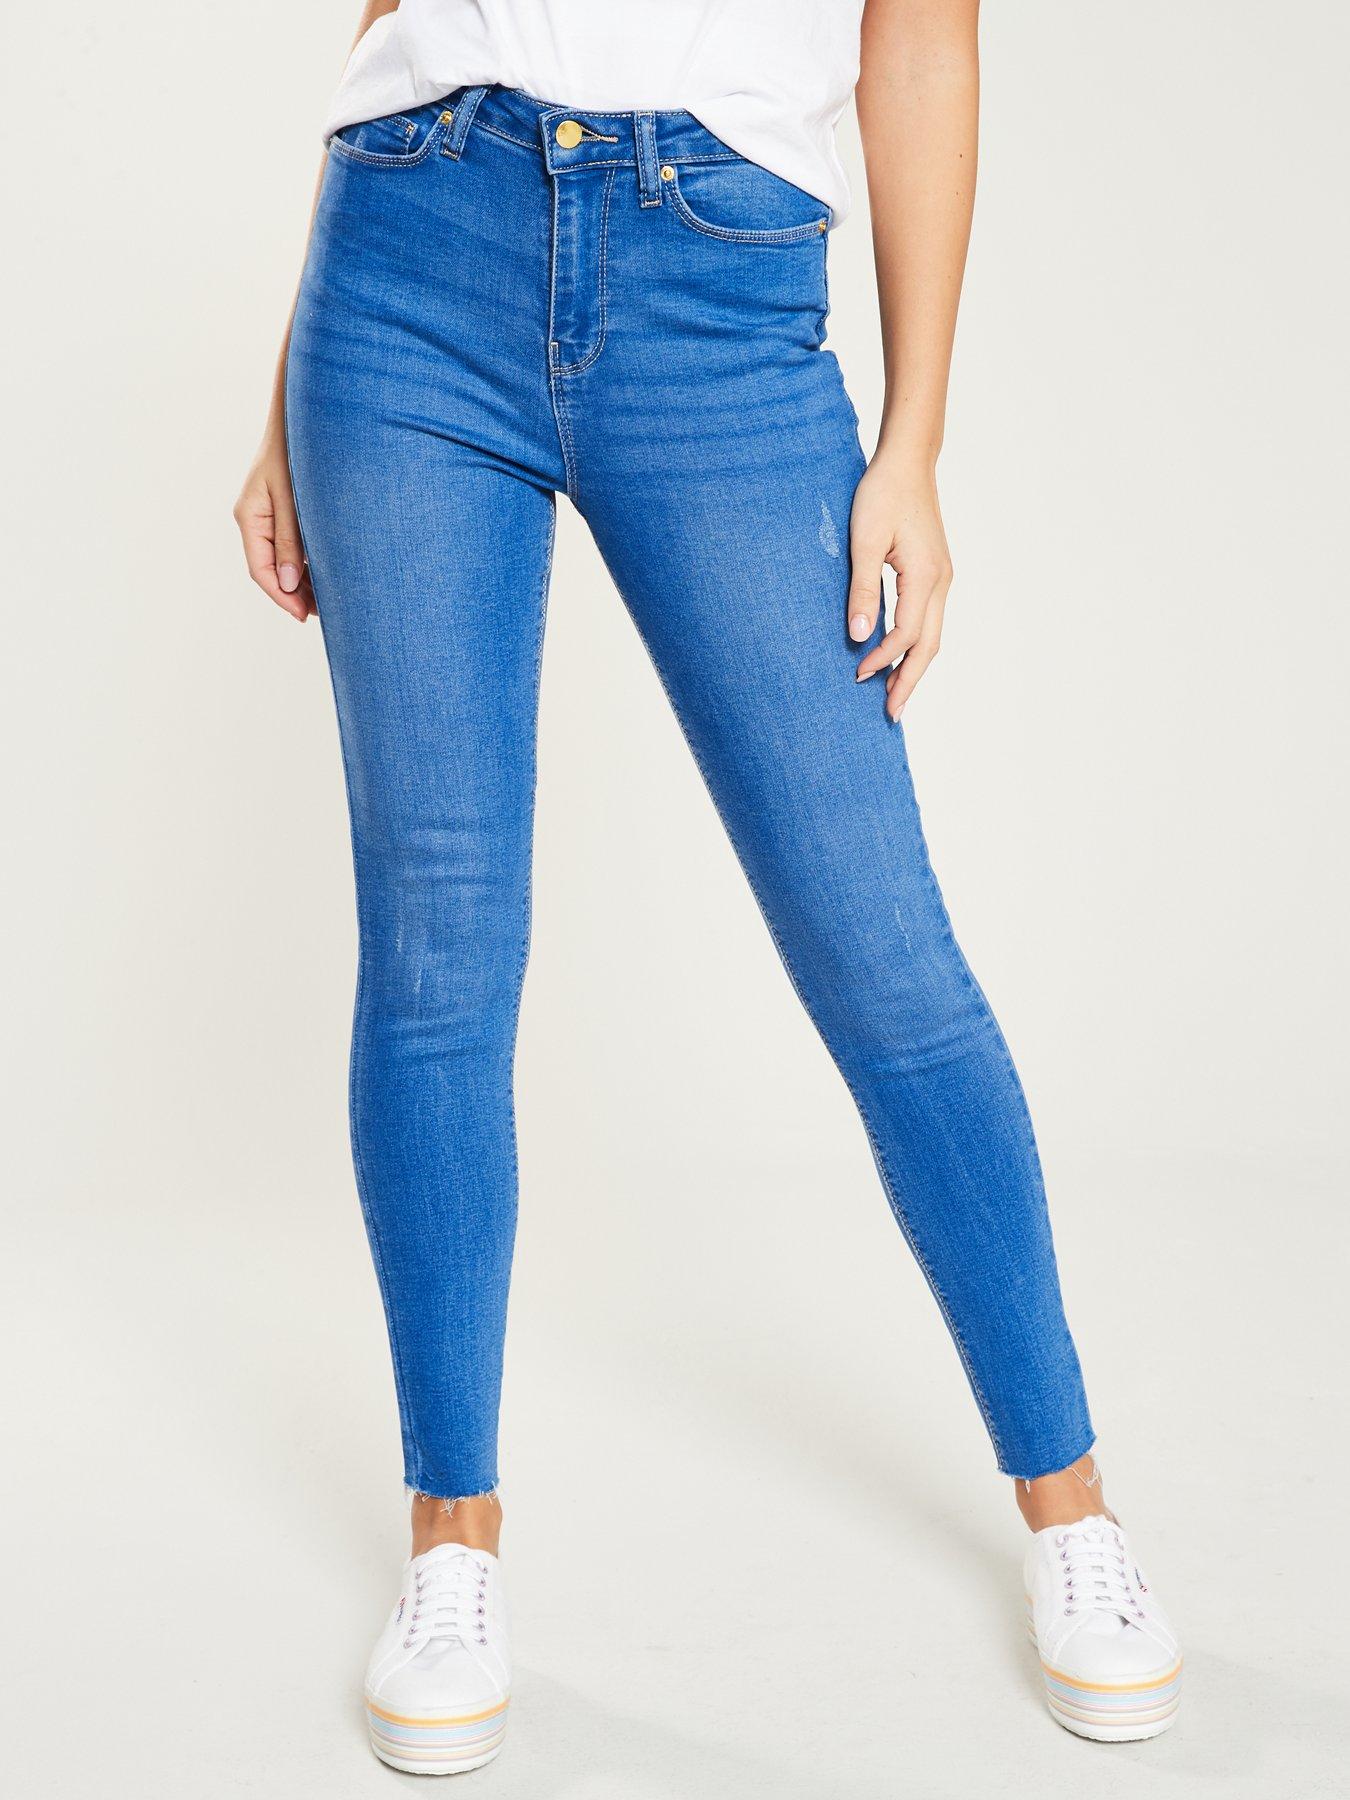 tillys rsq jeans